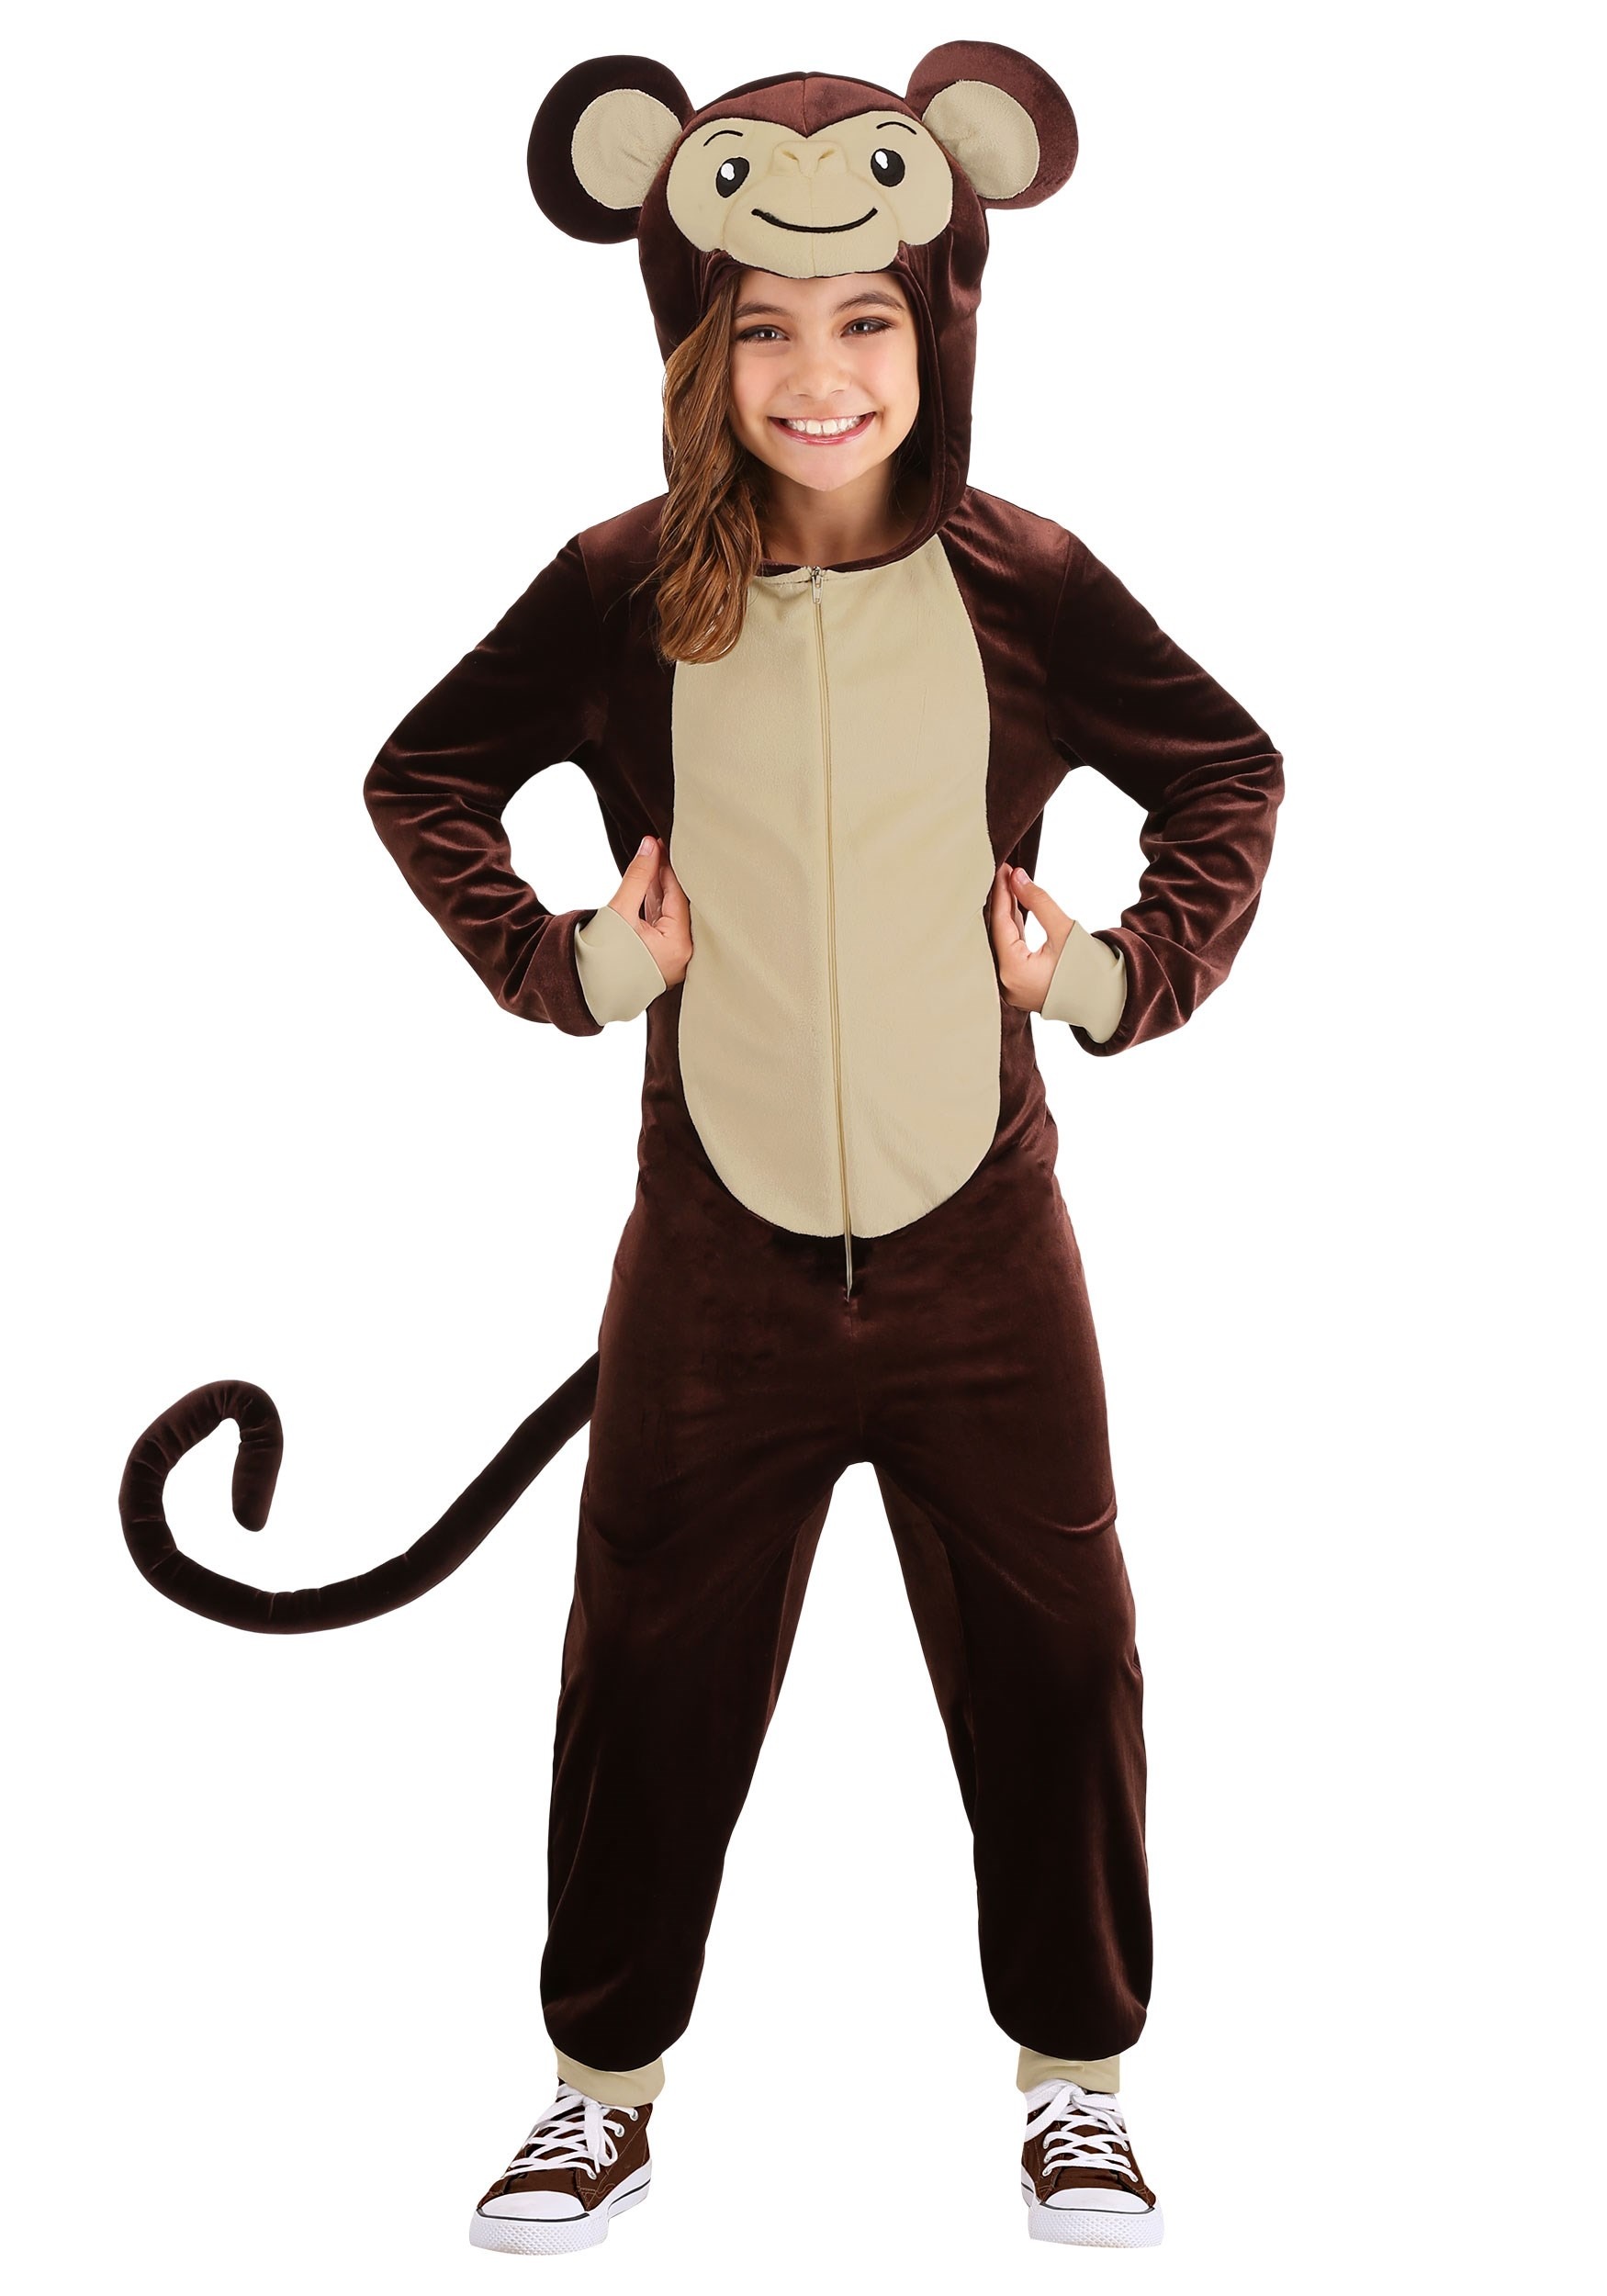 Photos - Fancy Dress FUN Costumes Silly Monkey Costume for Kids | Monkey Halloween Costumes Bro